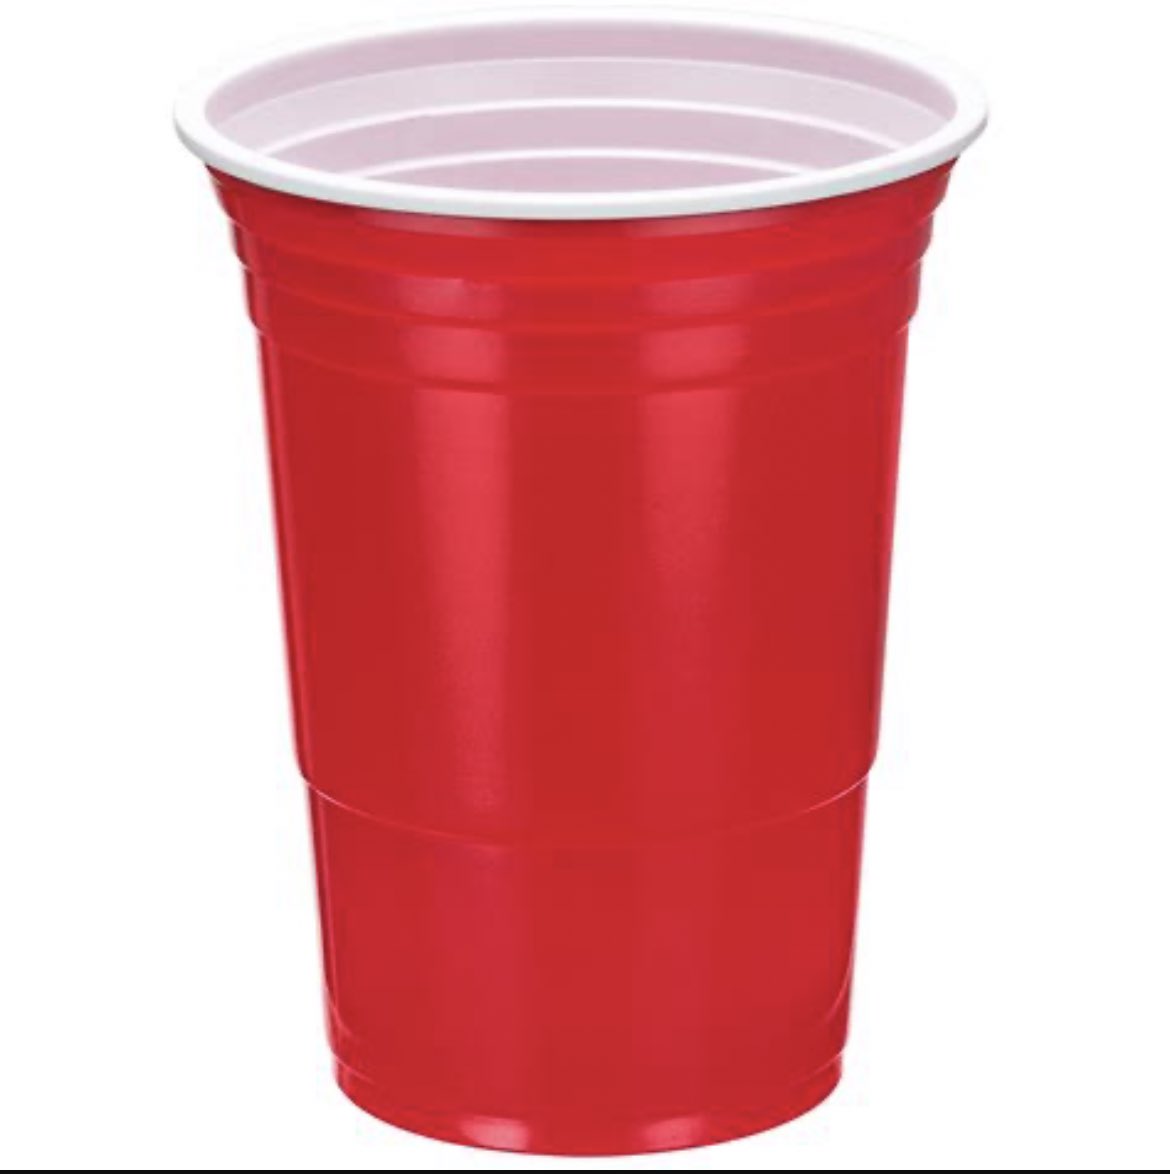 @RonDeSantis When you are president? LOL I bet this red solo cup gets more likes.